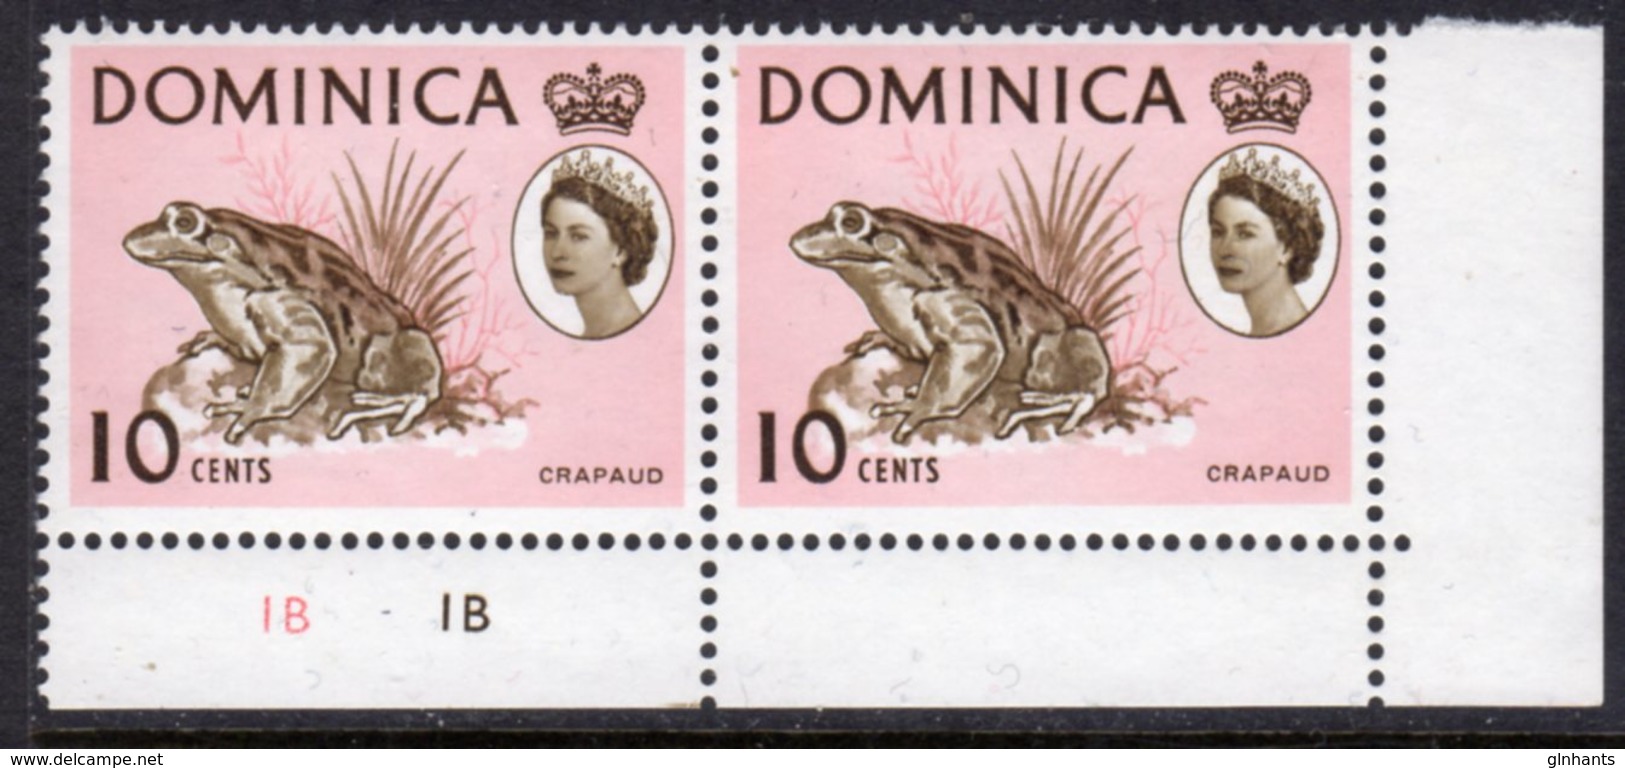 DOMINICA - 1963 QE II DEFINITIVE 10c STAMP PAIR WITH PLATE NO COLOUR CONTROLS FINE MNH ** SG169 X 2 - Dominica (...-1978)